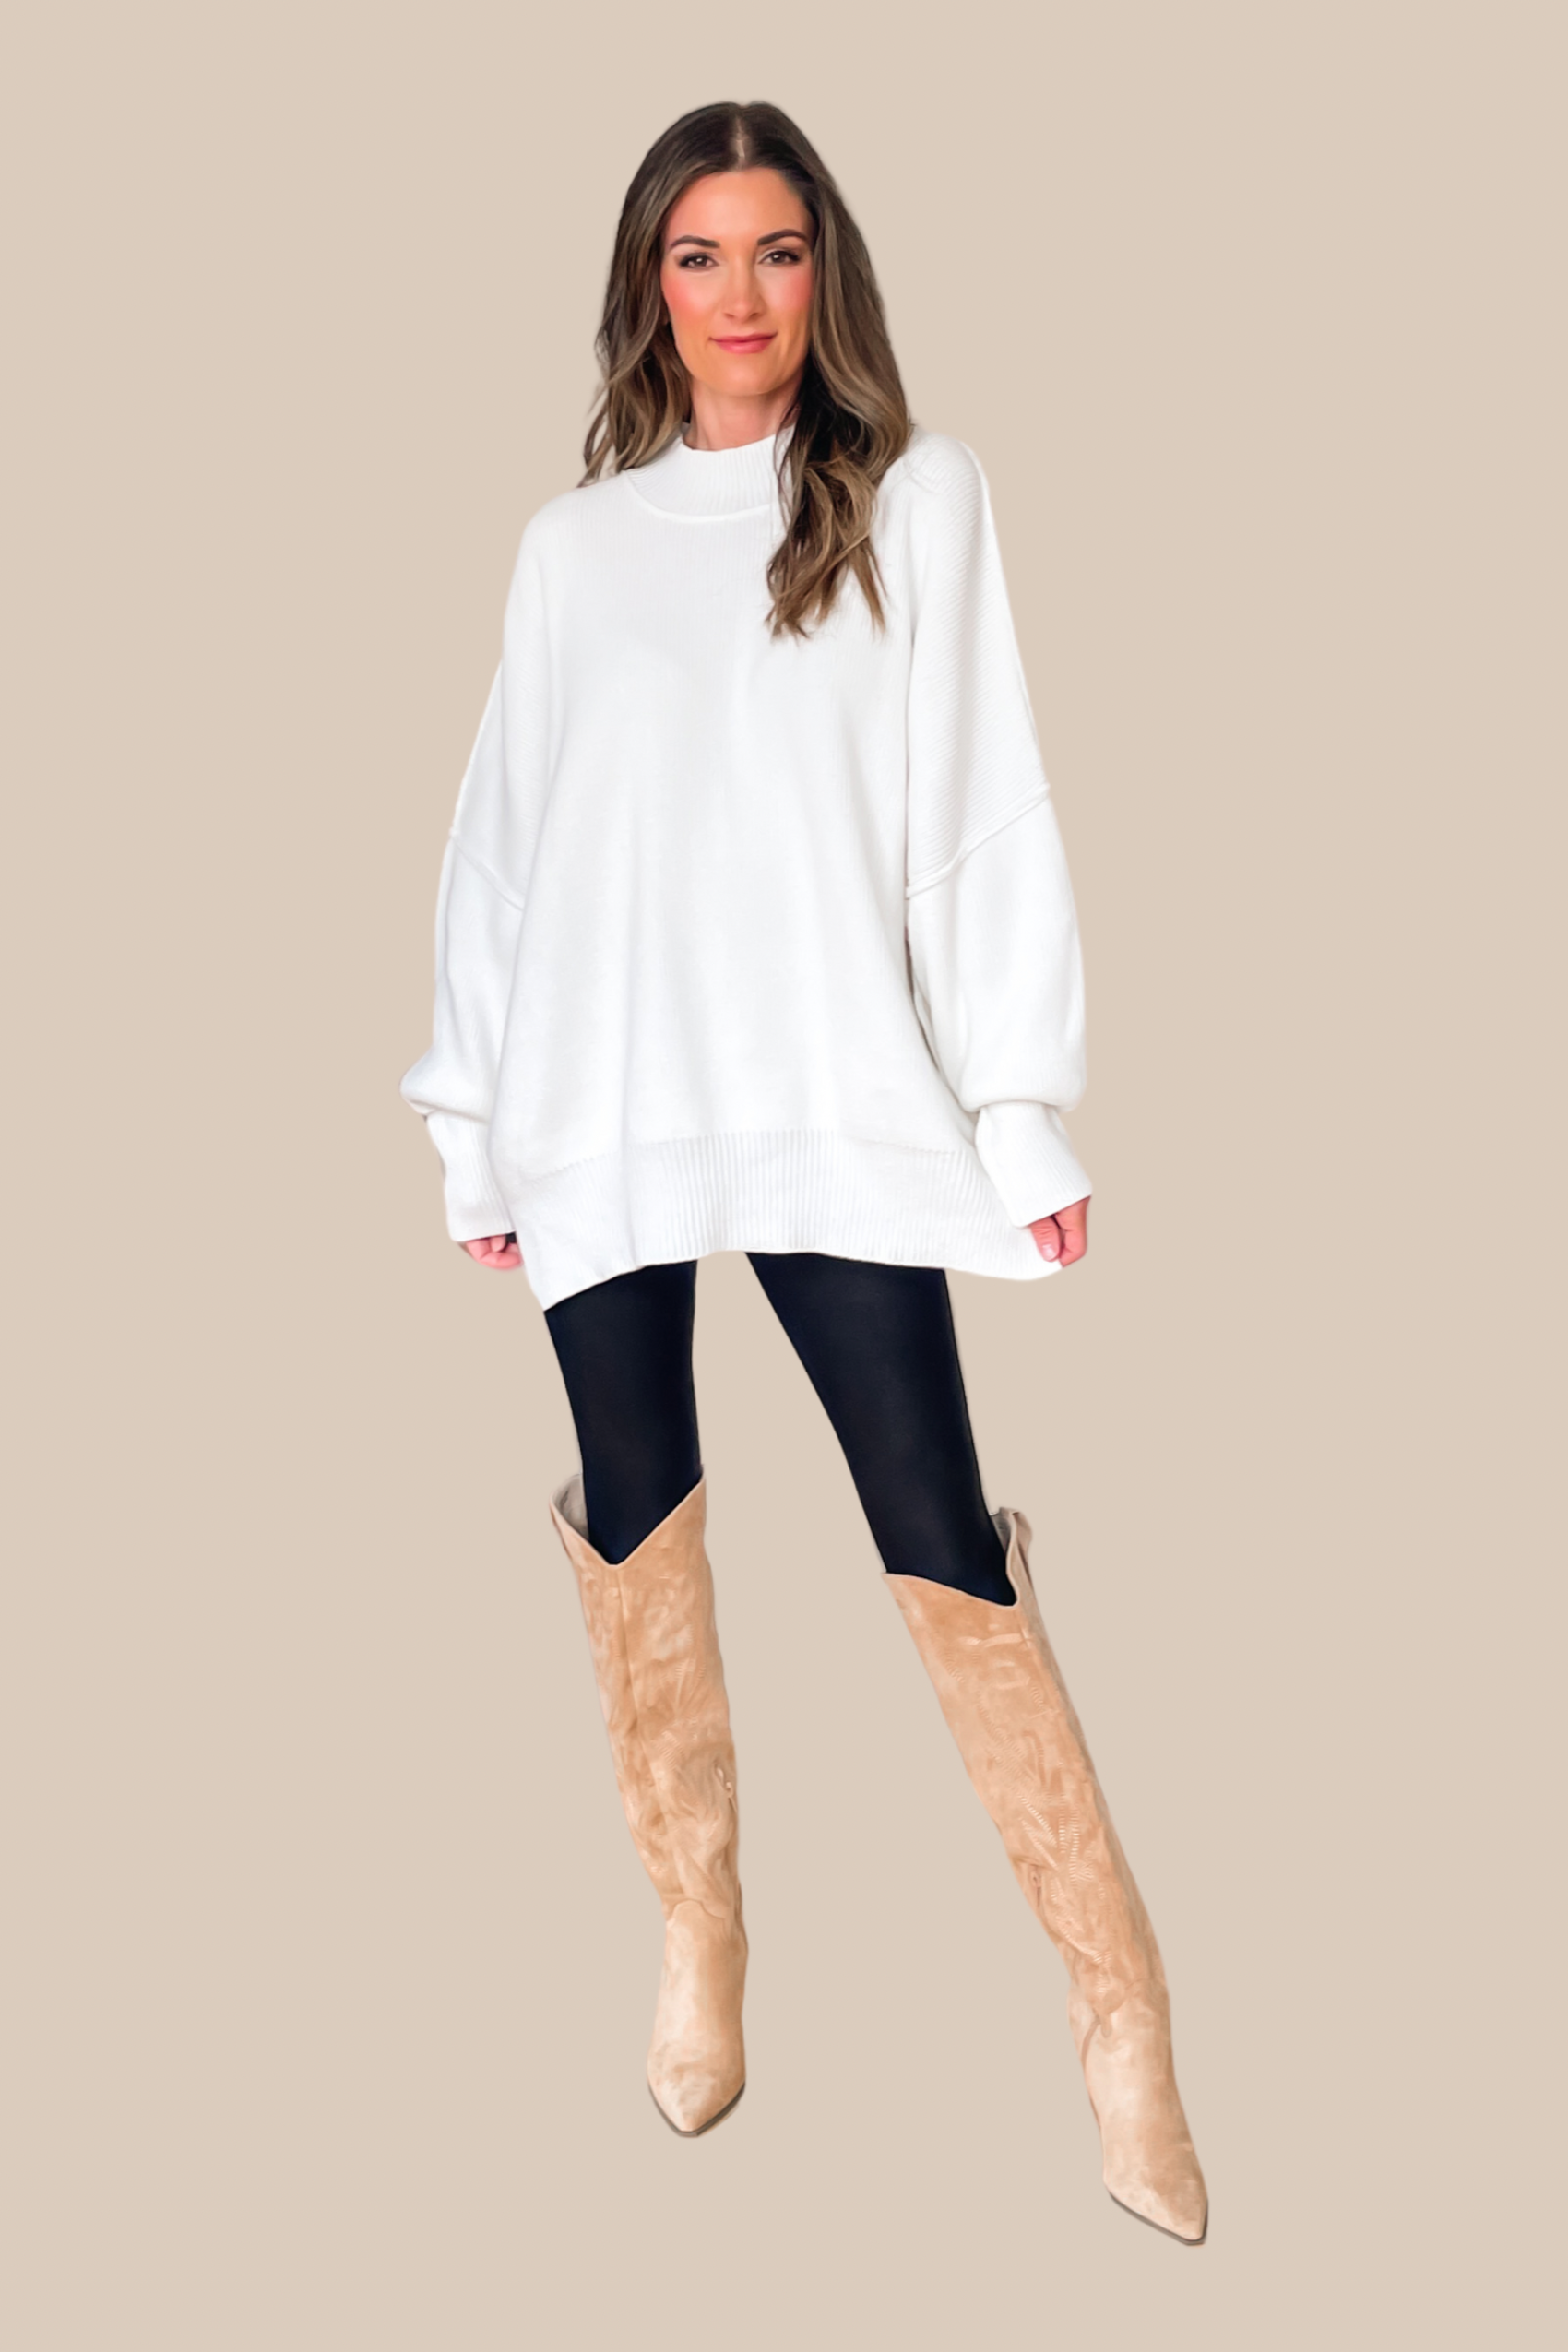 Eye Candy Tunic Sweater in Ivory